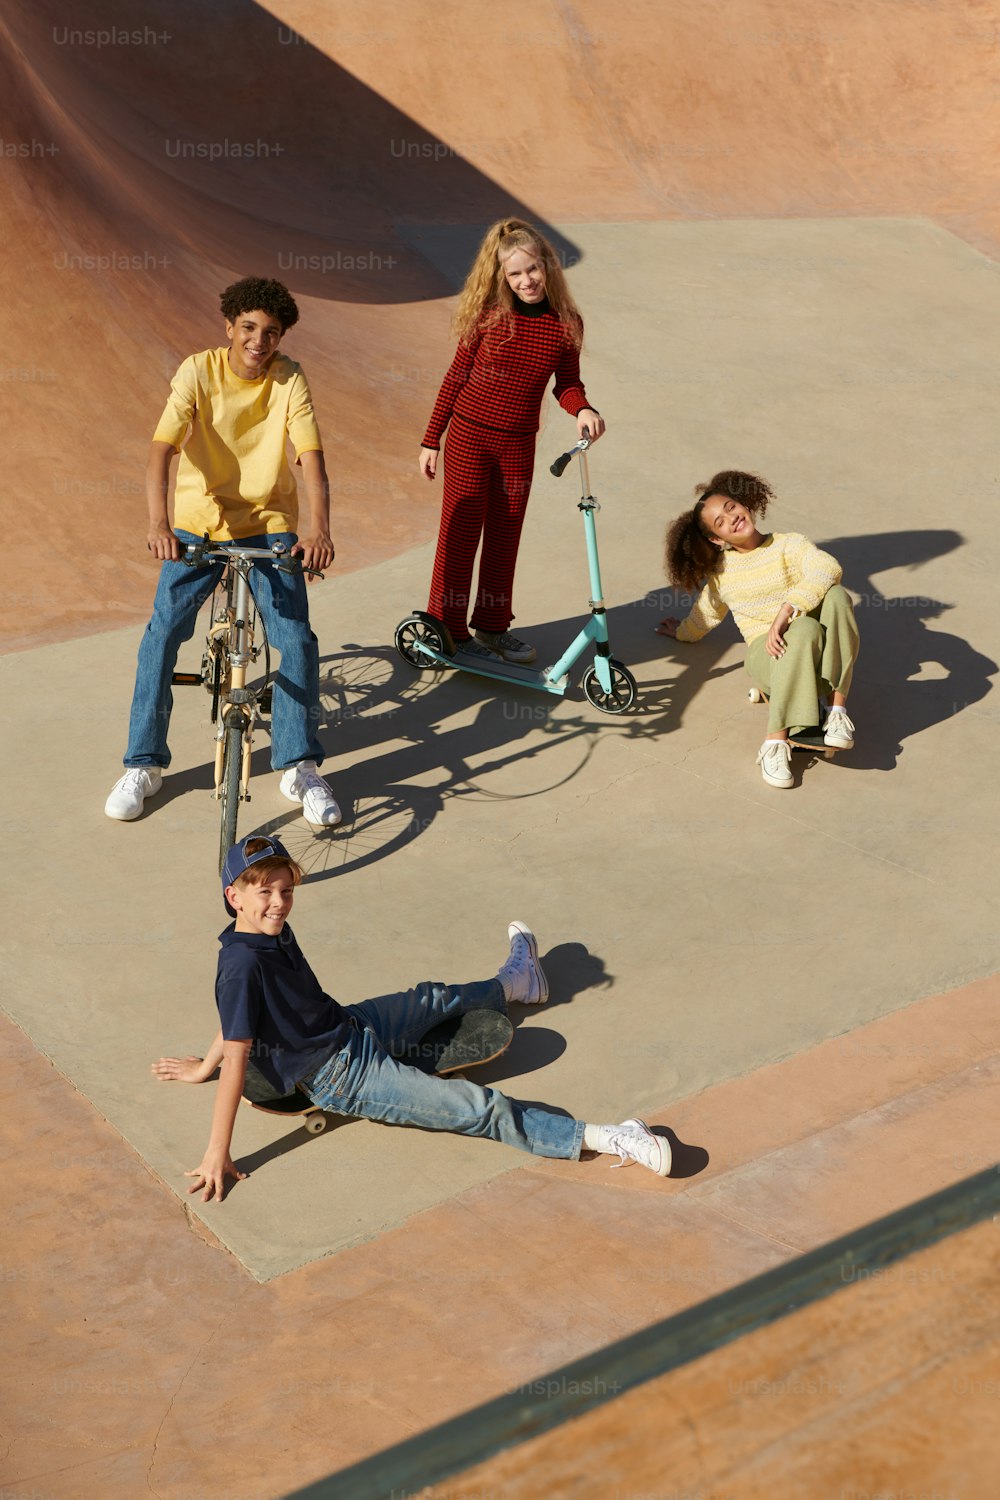 a group of people riding bikes on top of a skate park